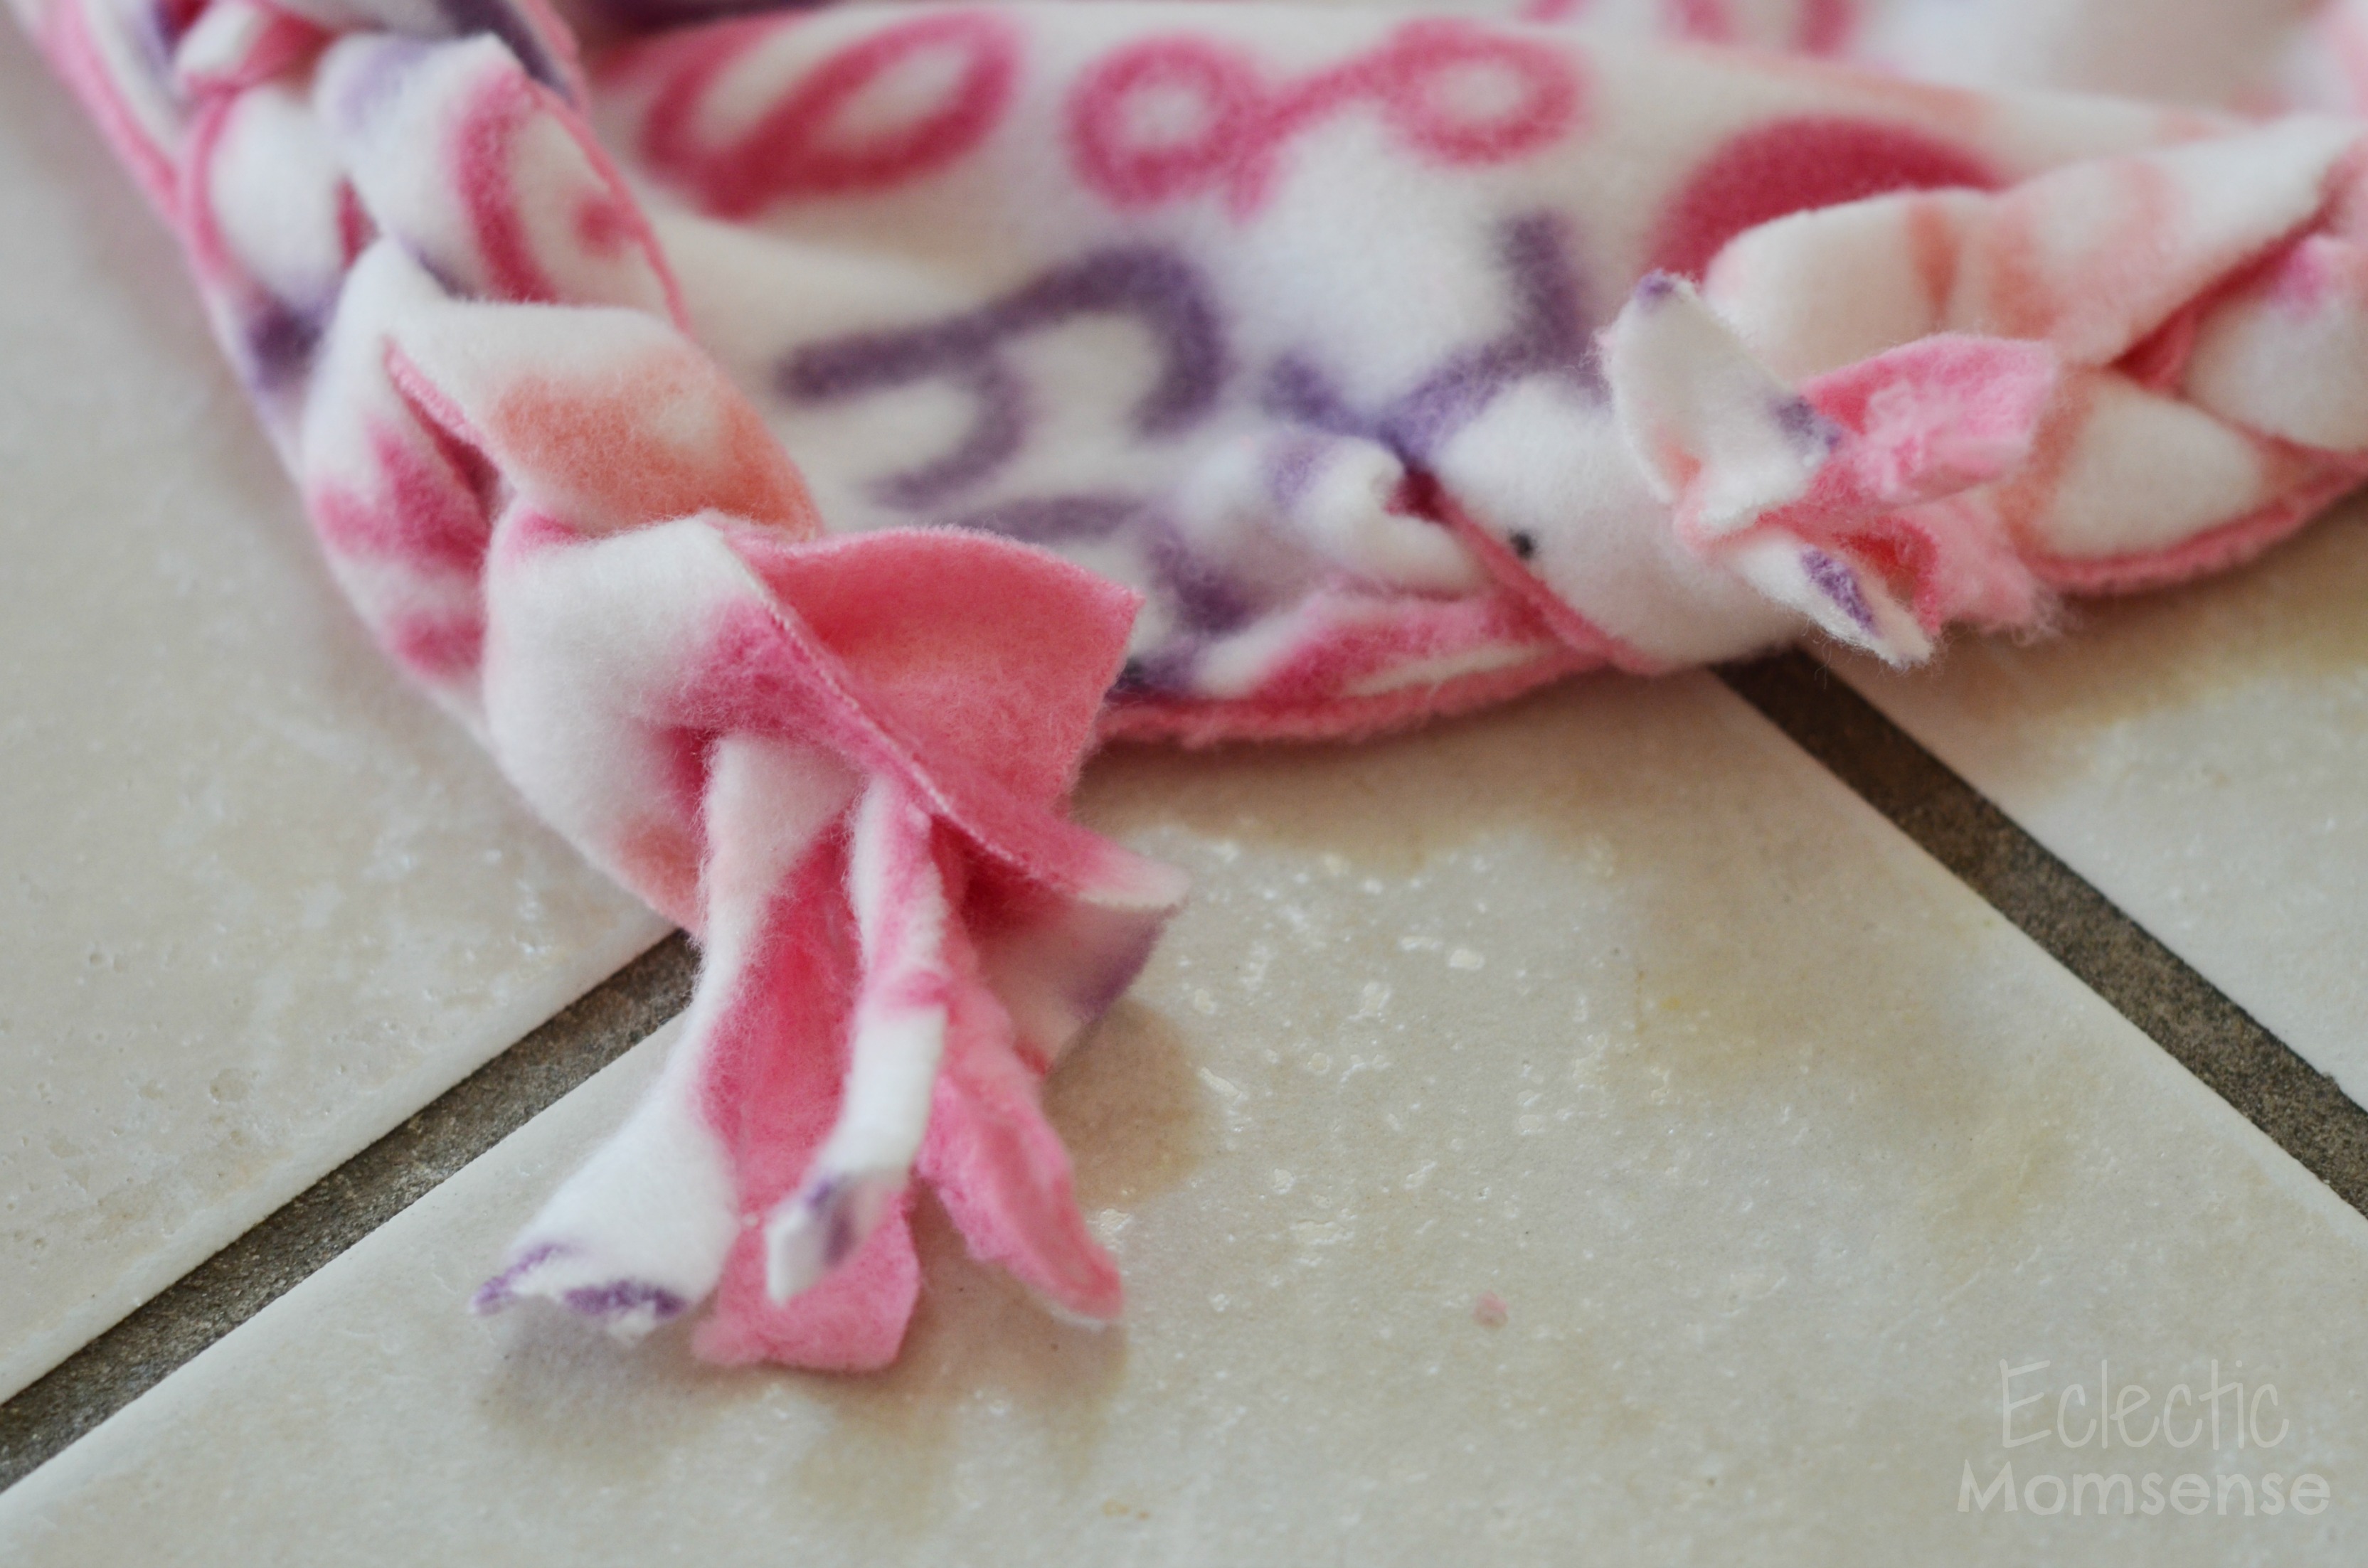 No-Sew Knotted Blanket Kits